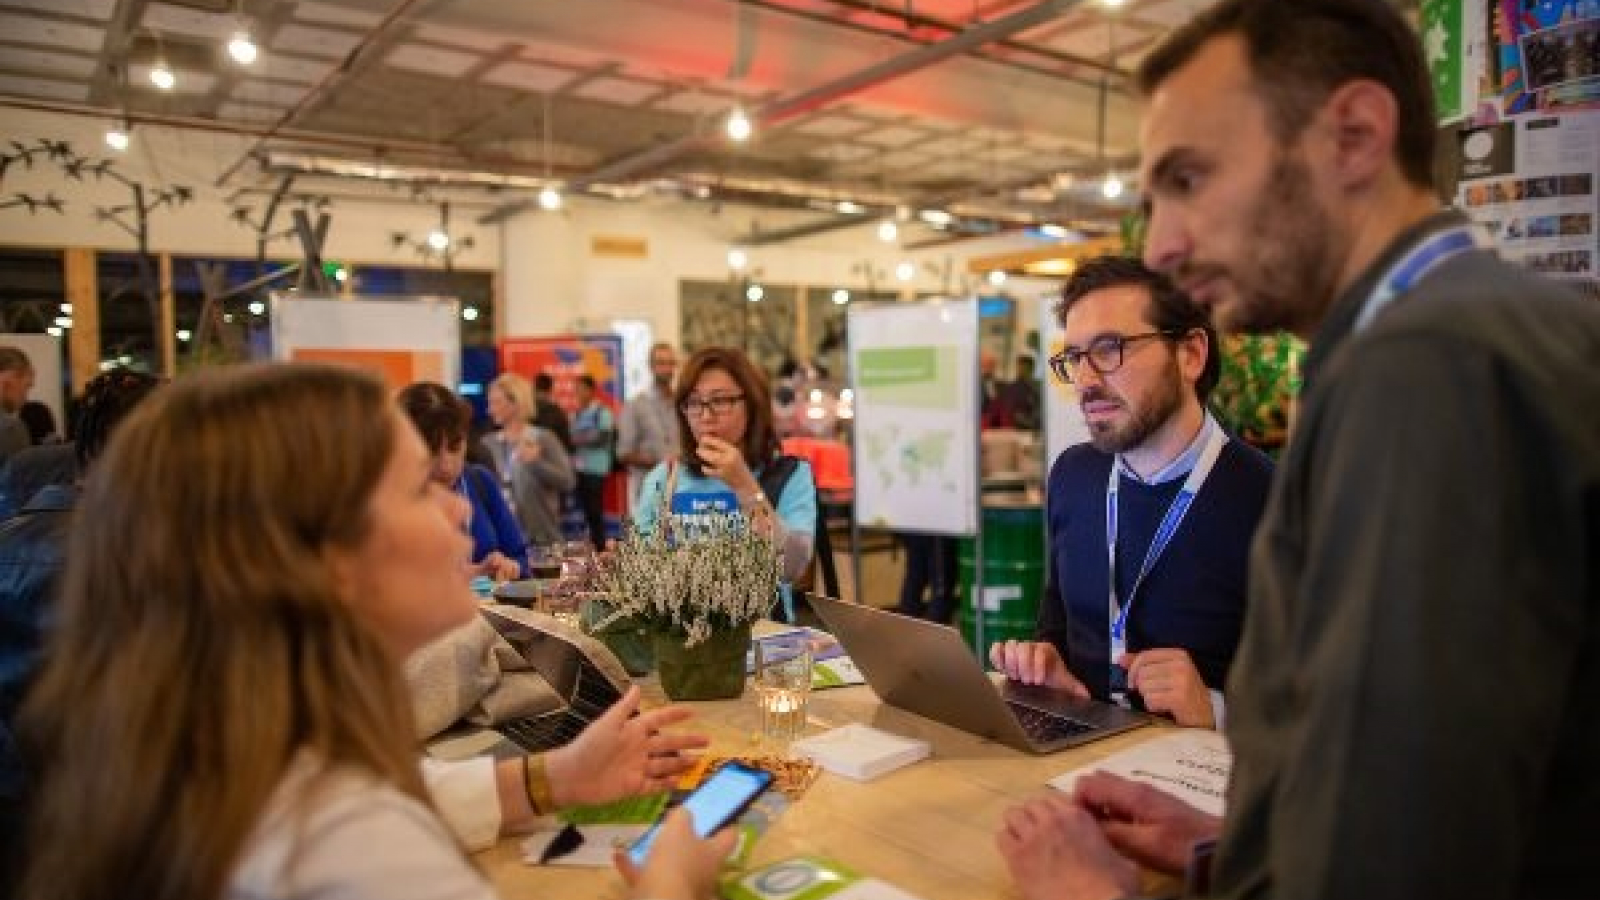 Eastern partner countries to compete in regional finals of ClimateLaunchpad 2020 competition